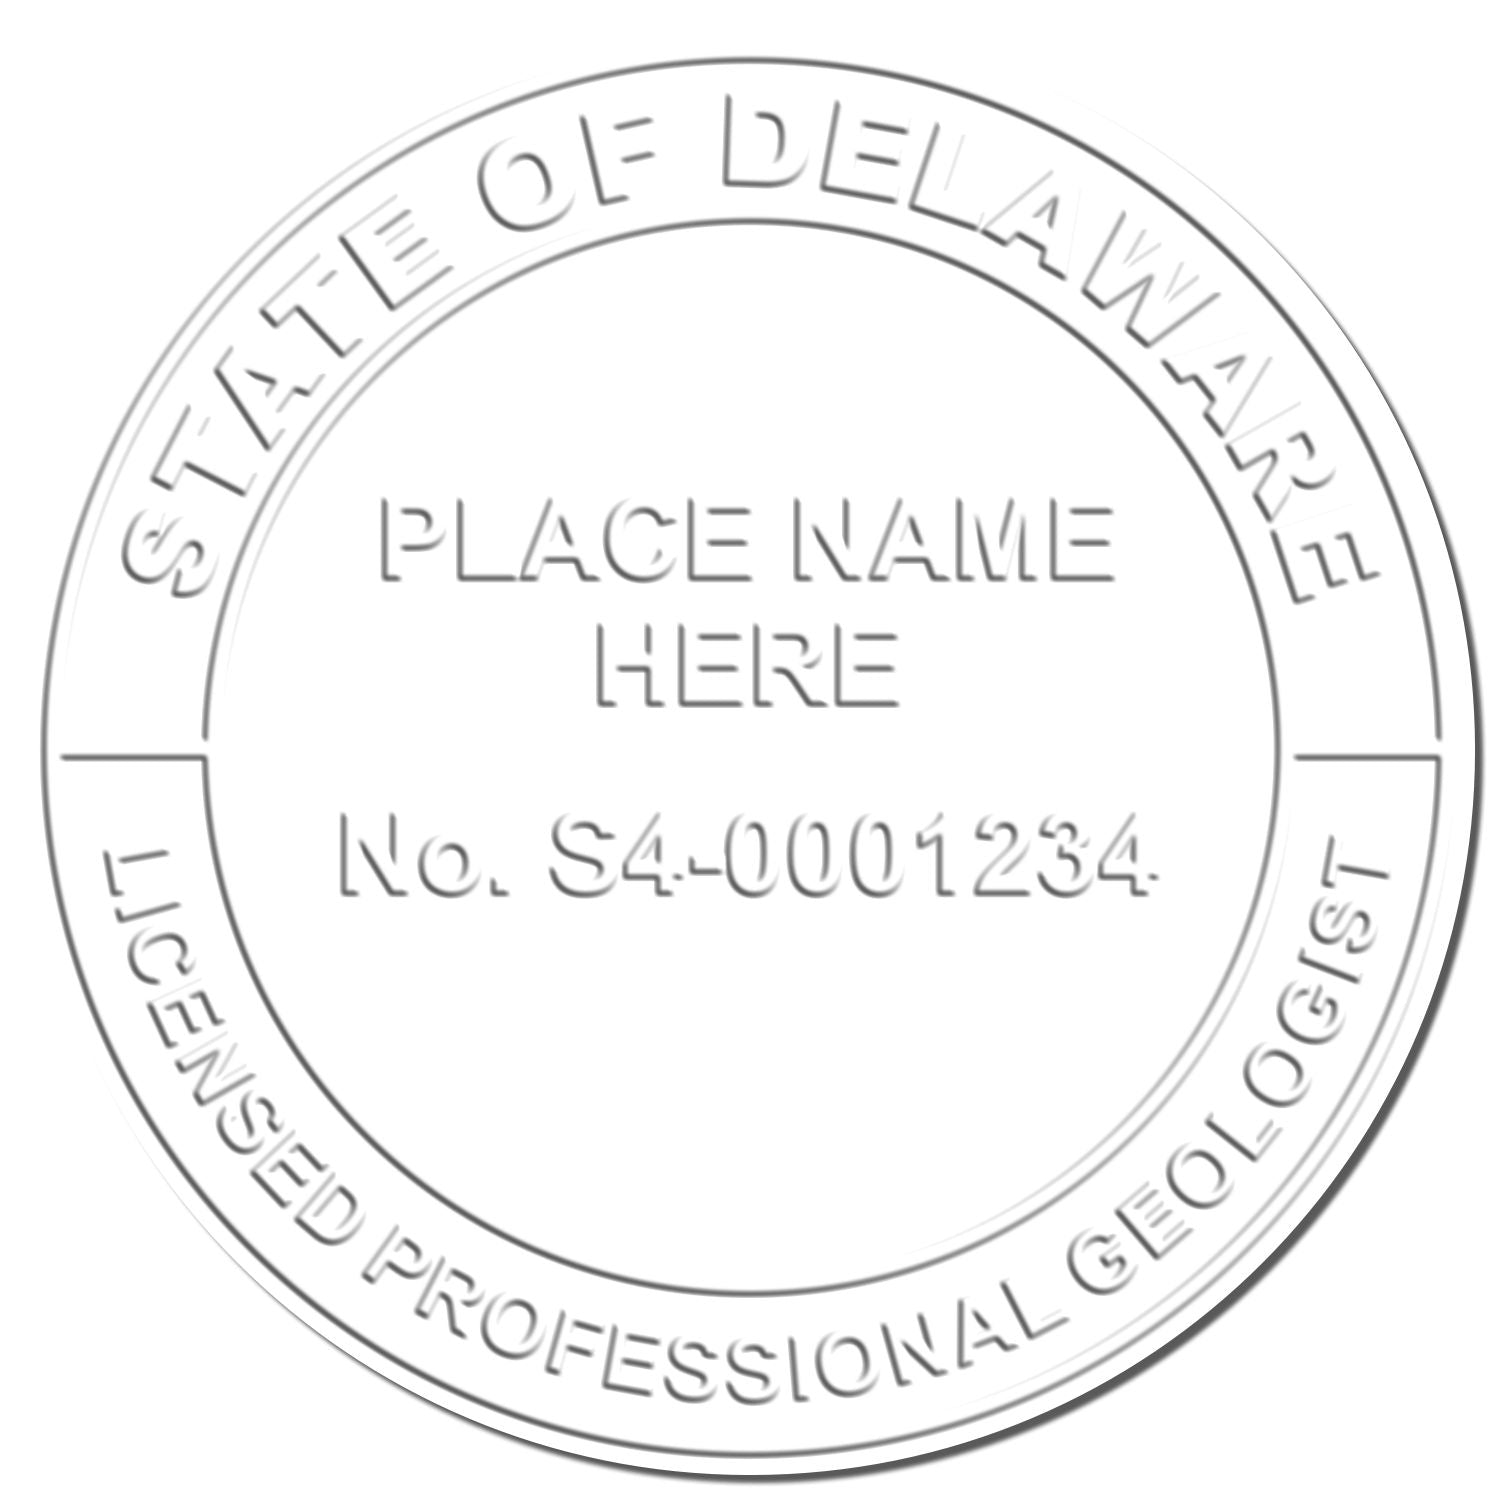 A photograph of the Hybrid Delaware Geologist Seal stamp impression reveals a vivid, professional image of the on paper.